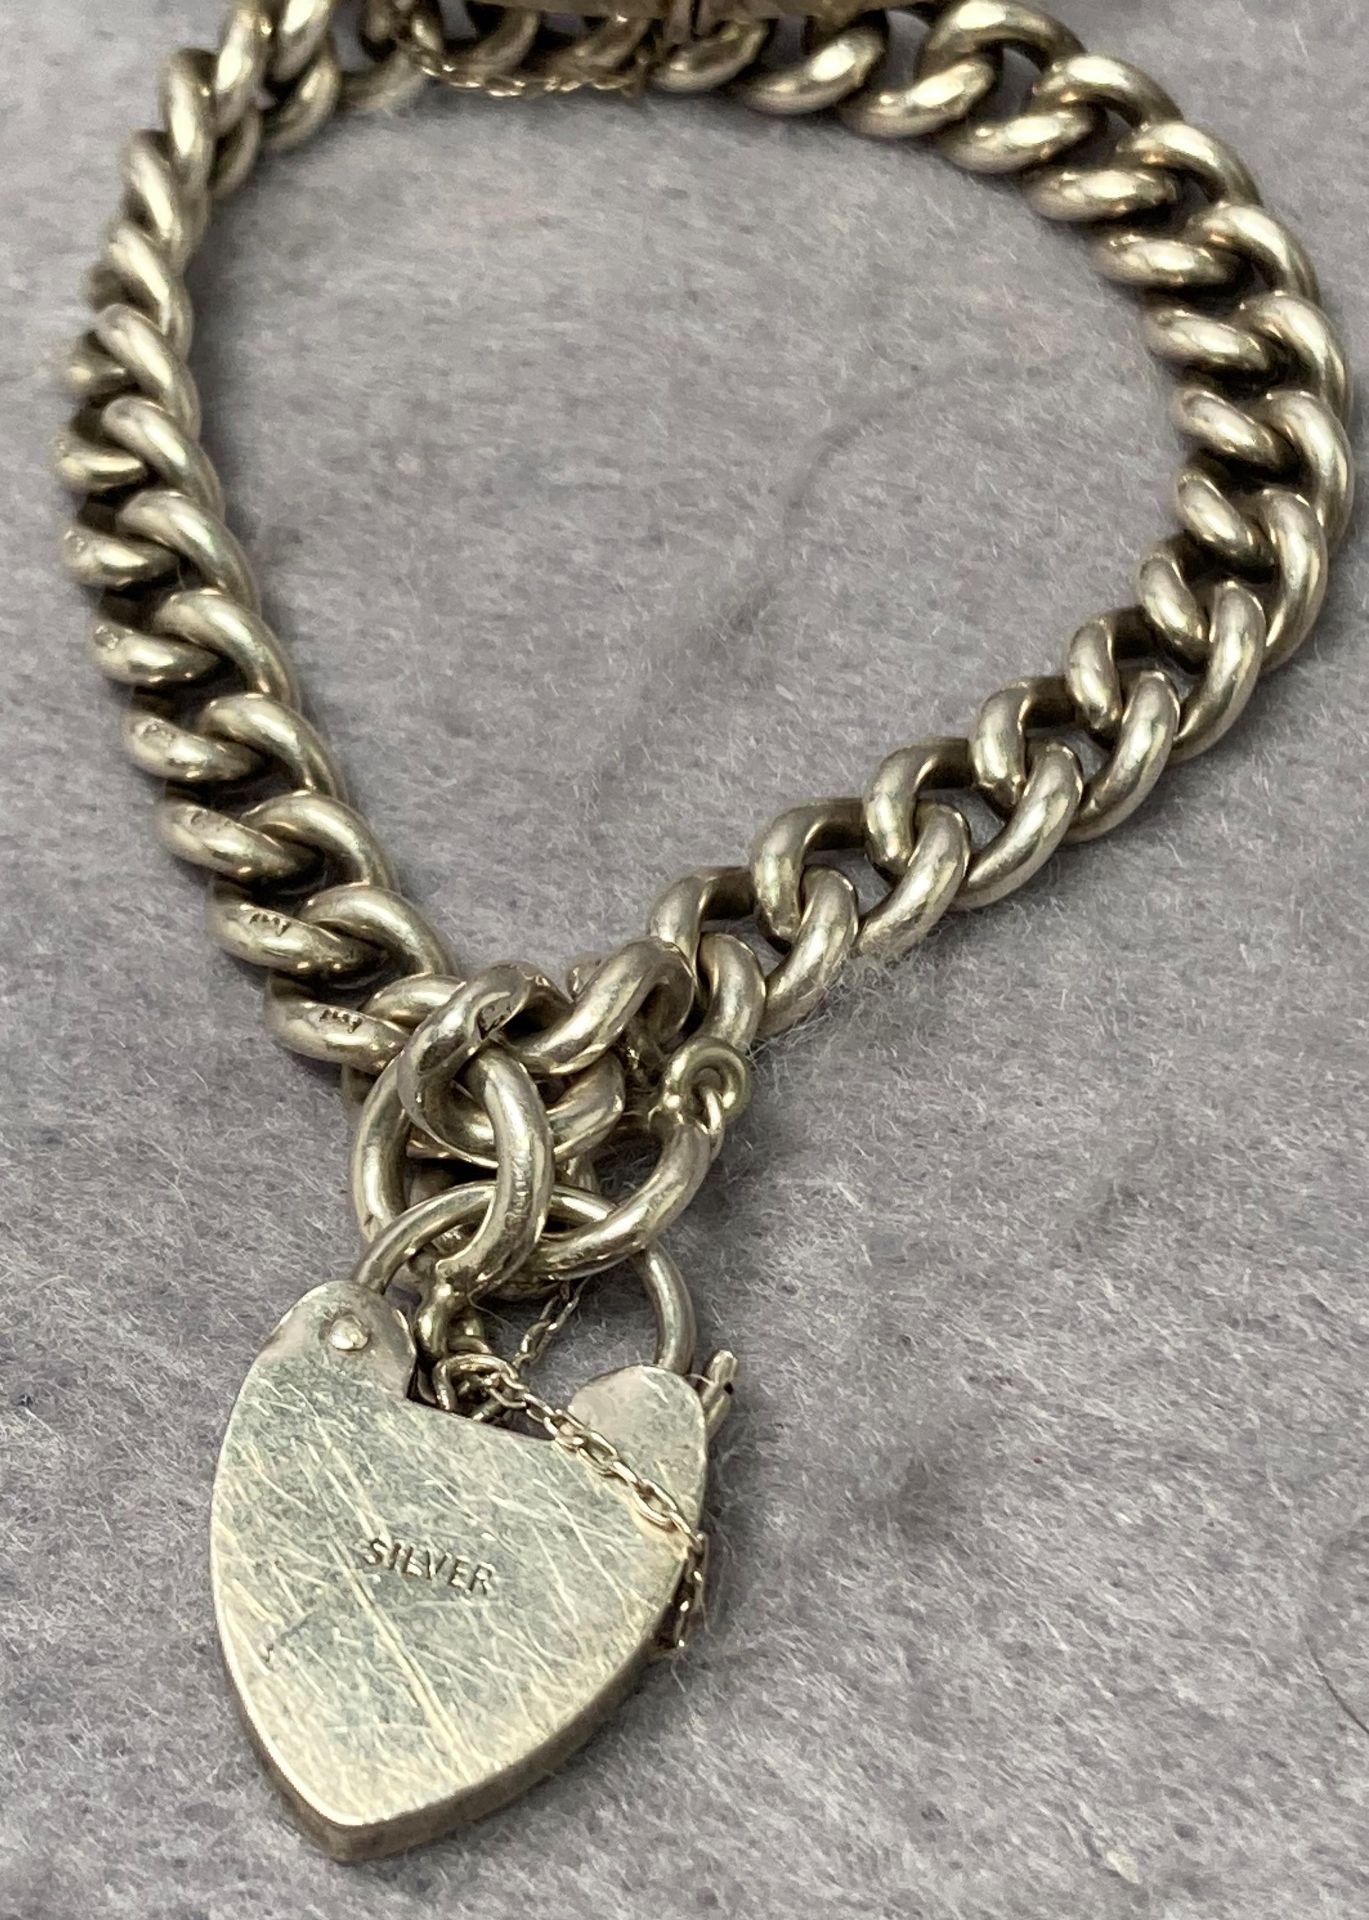 Silver hallmarked link bracelet with heart-shaped padlock clasp (7" long) and a silver hallmarked - Image 2 of 3